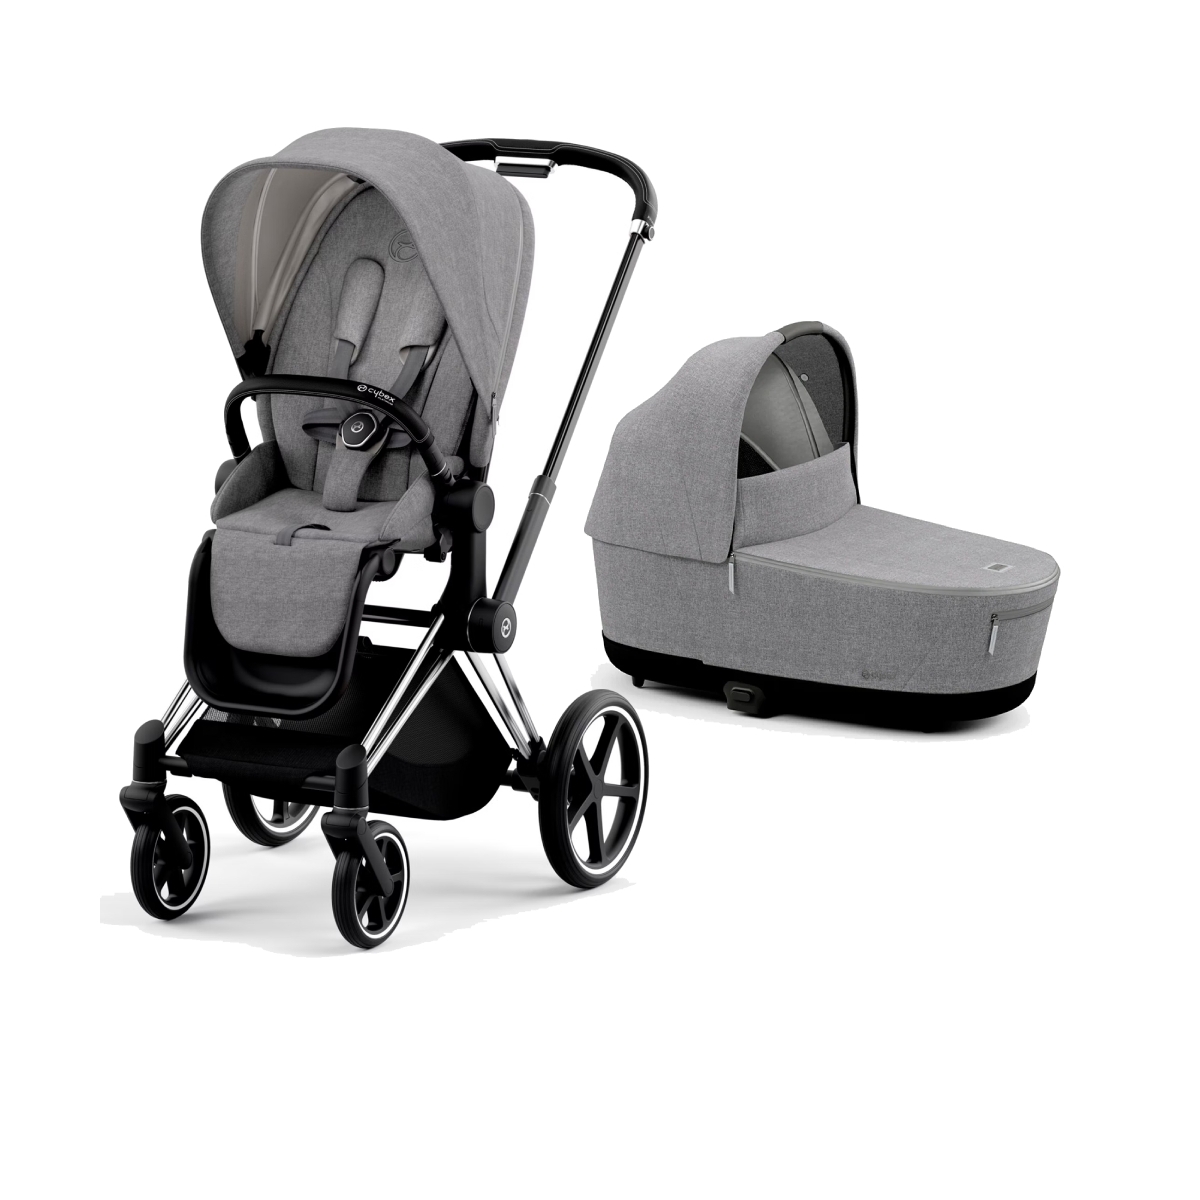 Cybex Priam Chrome Pushchair with Lux Carry Cot